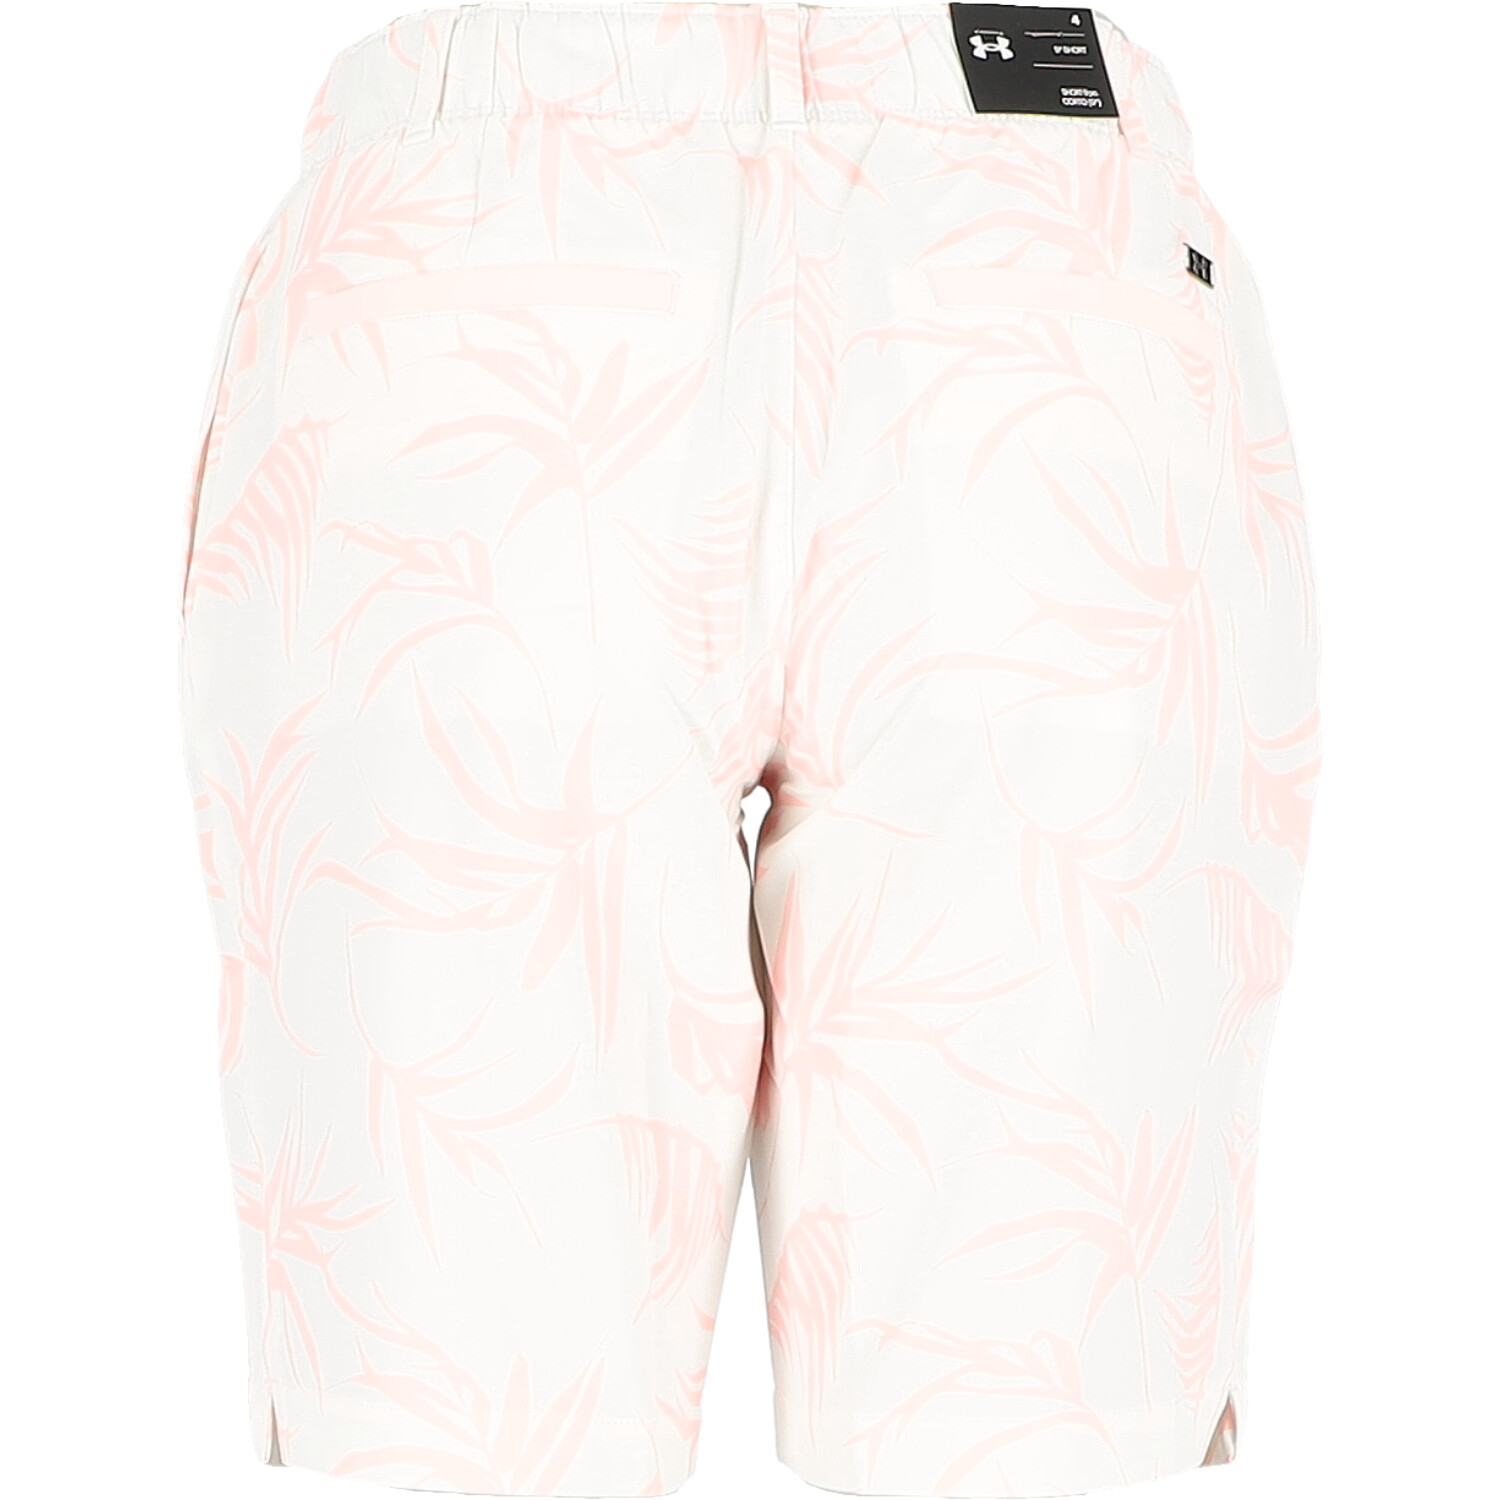 Under Armour Links Printed Shorts White